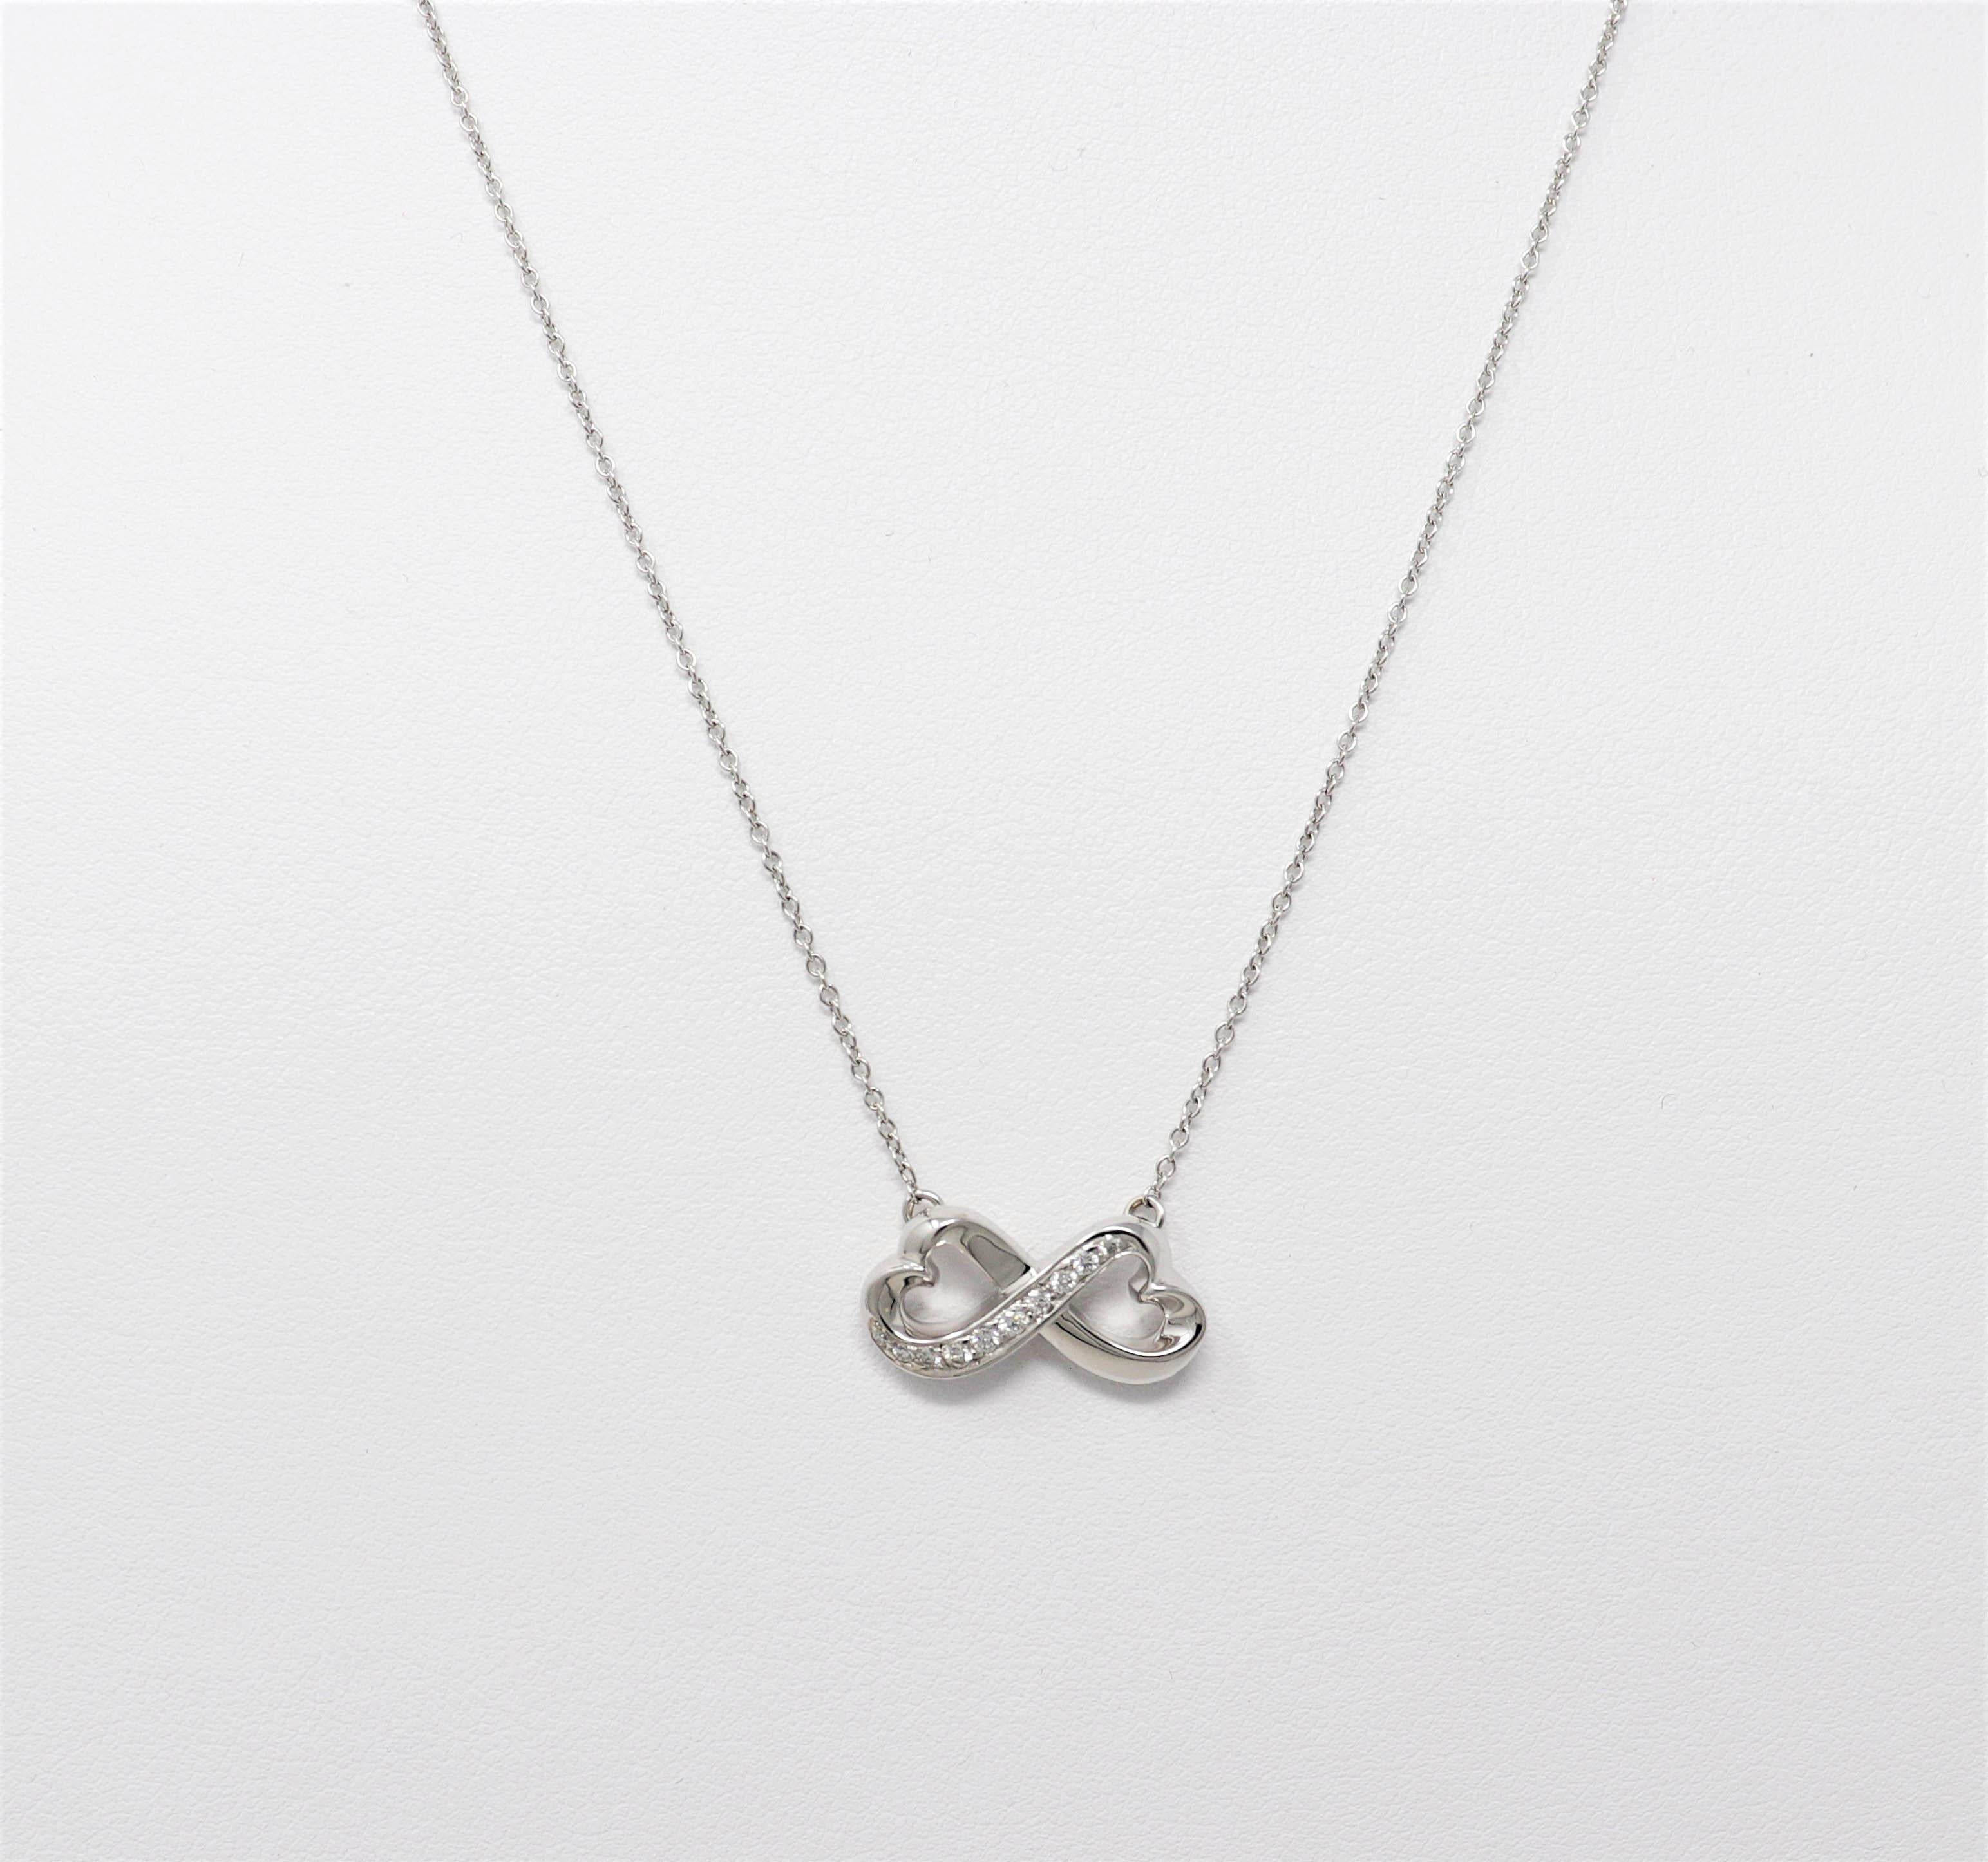 Designed exclusively for Tiffany & Co. by Paloma Picasso, this delicate diamond necklace will stand the test of time. The timeless open heart infinity symbol is embellished with glittering Tiffany diamonds, while the finely woven white gold chain